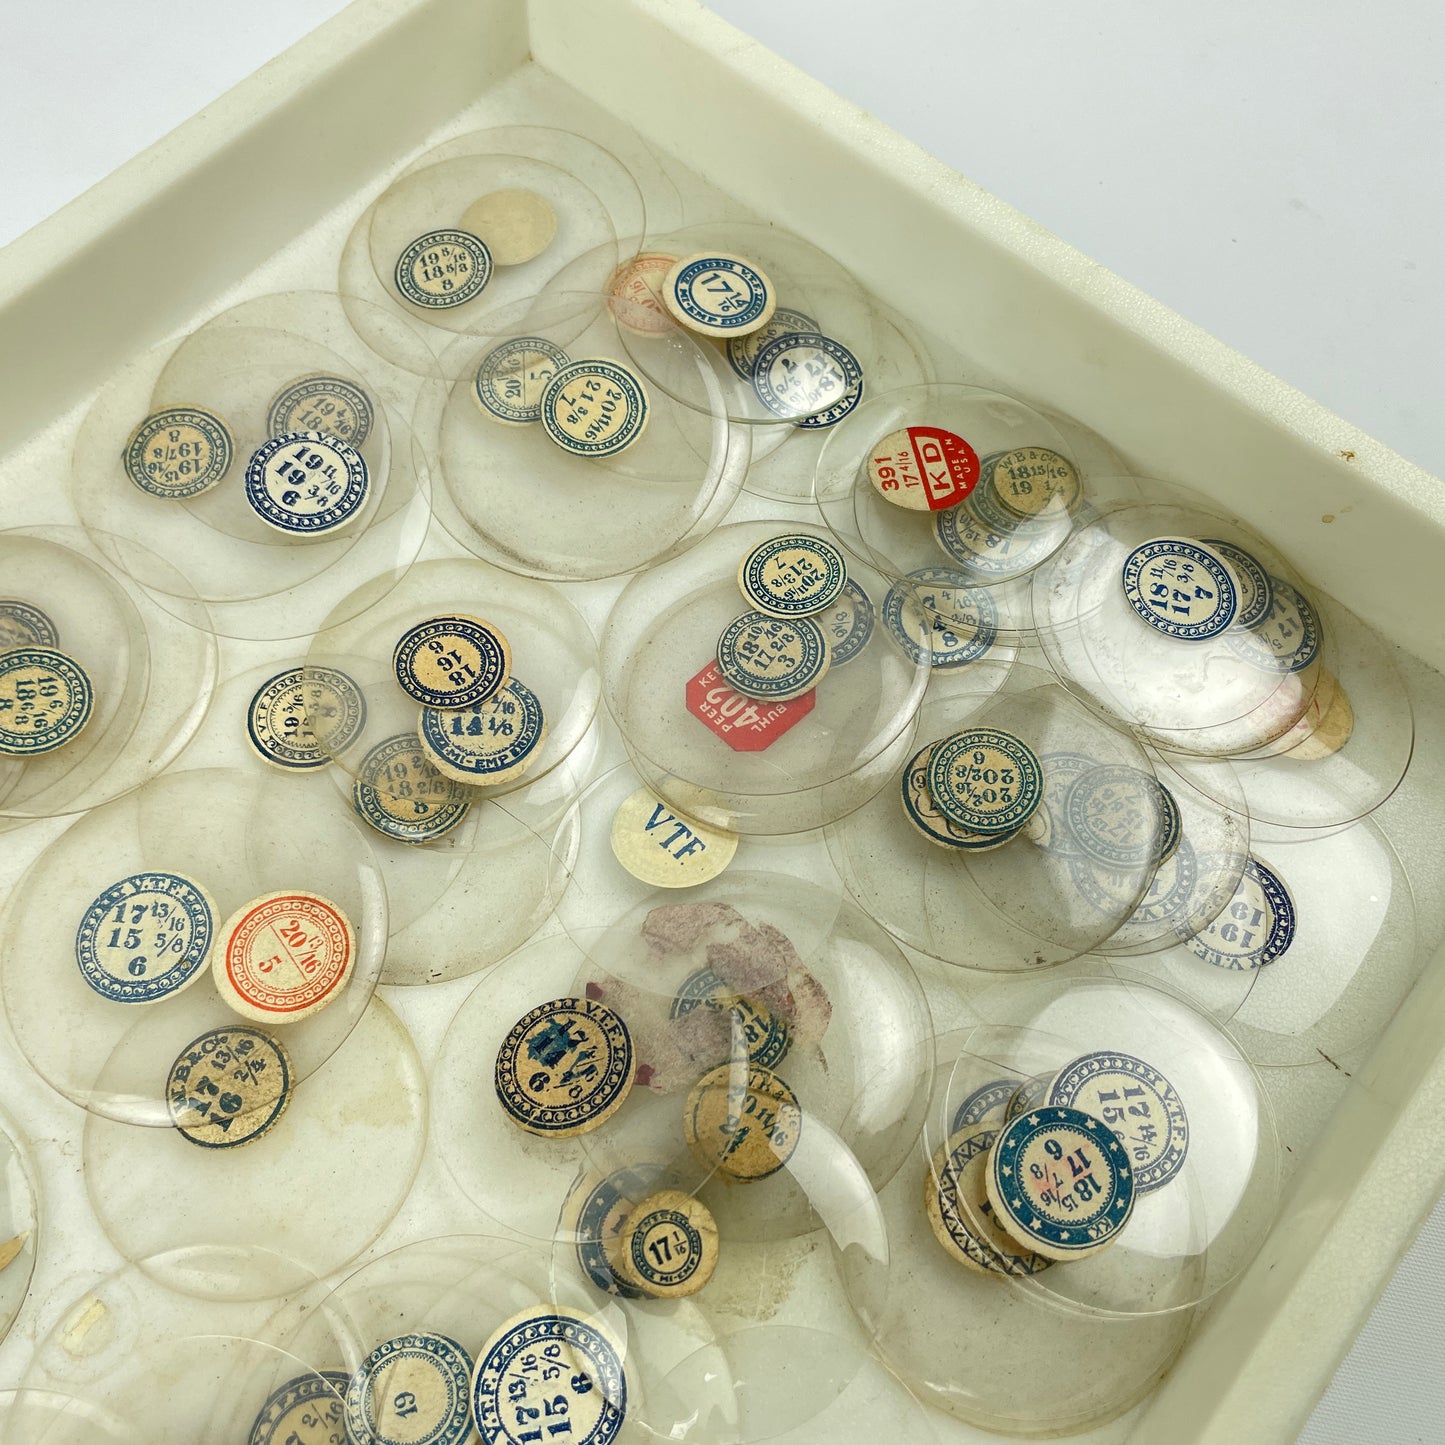 Lot 2- Watchmaker’s & Collector's Selection of Glass NOS Pocket Watch Crystals